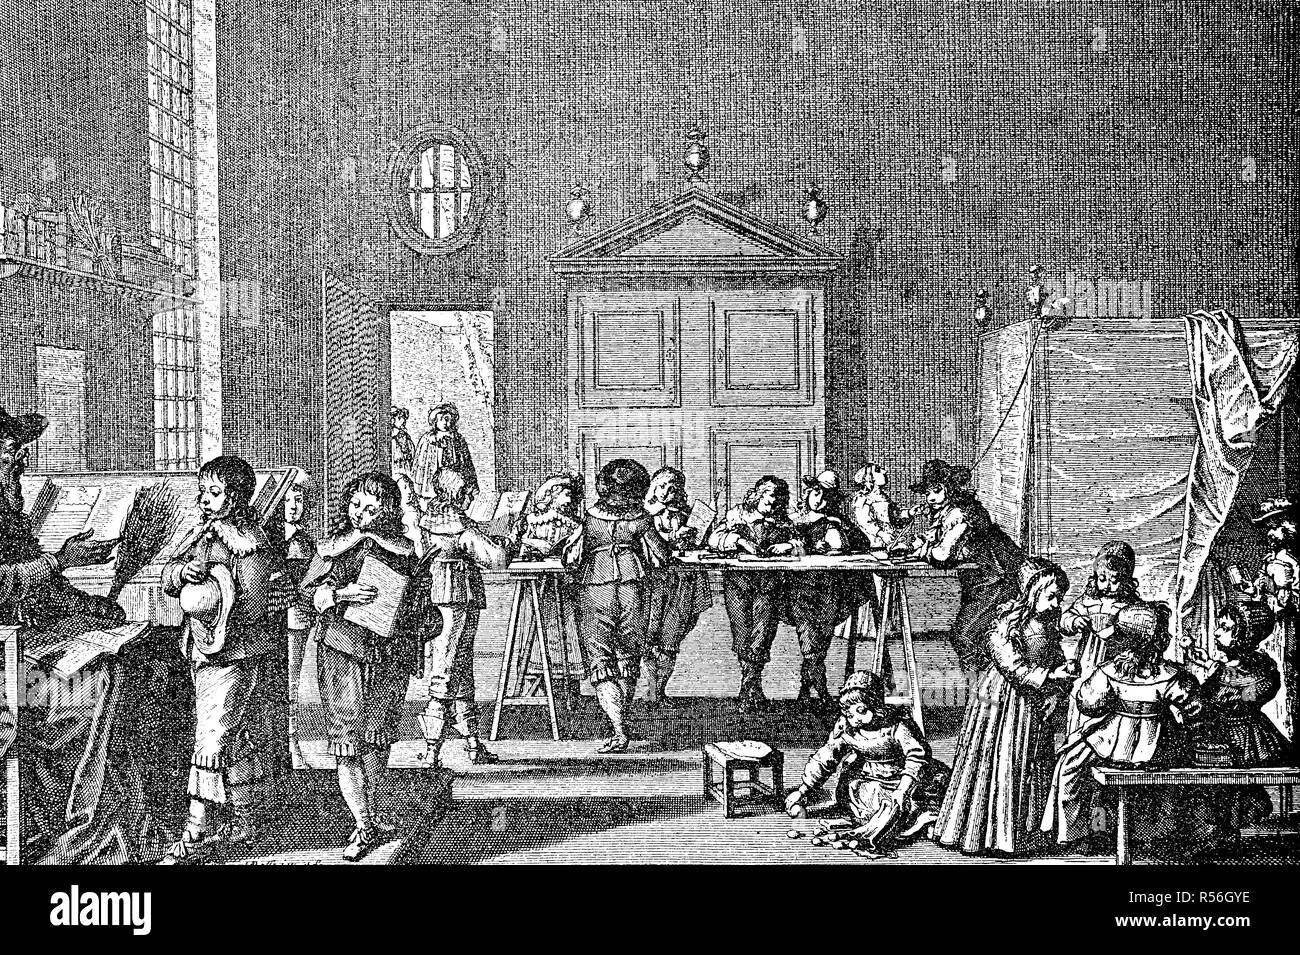 School of boys in the 17th century, woodcut, England Stock Photo